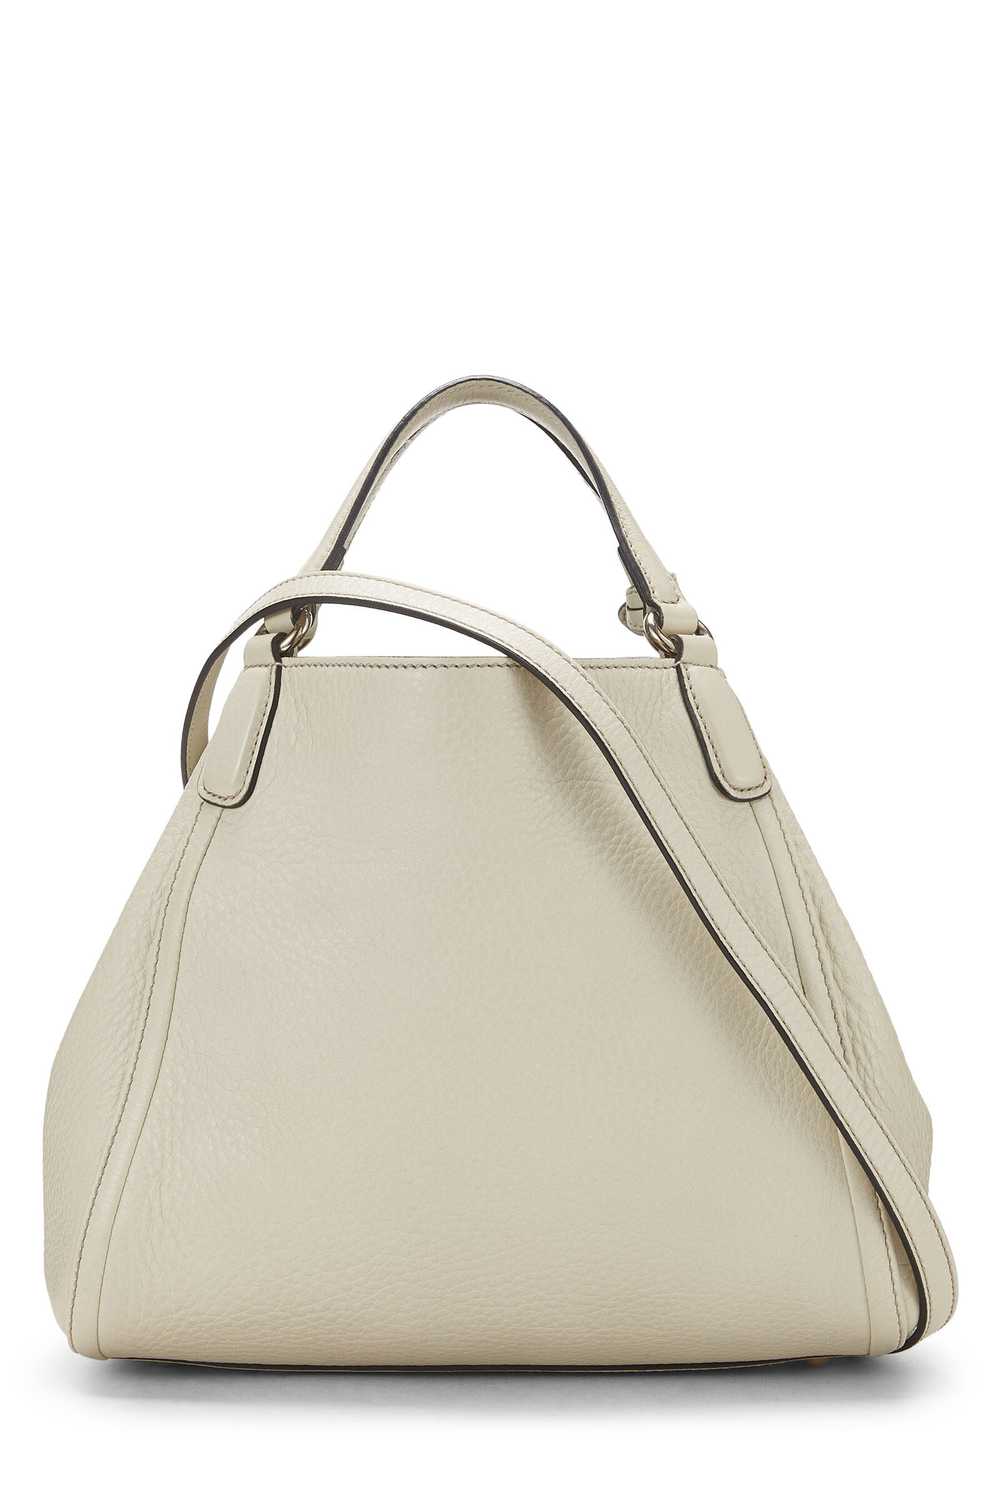 White Leather Soho Convertible Shoulder Bag Small - image 4